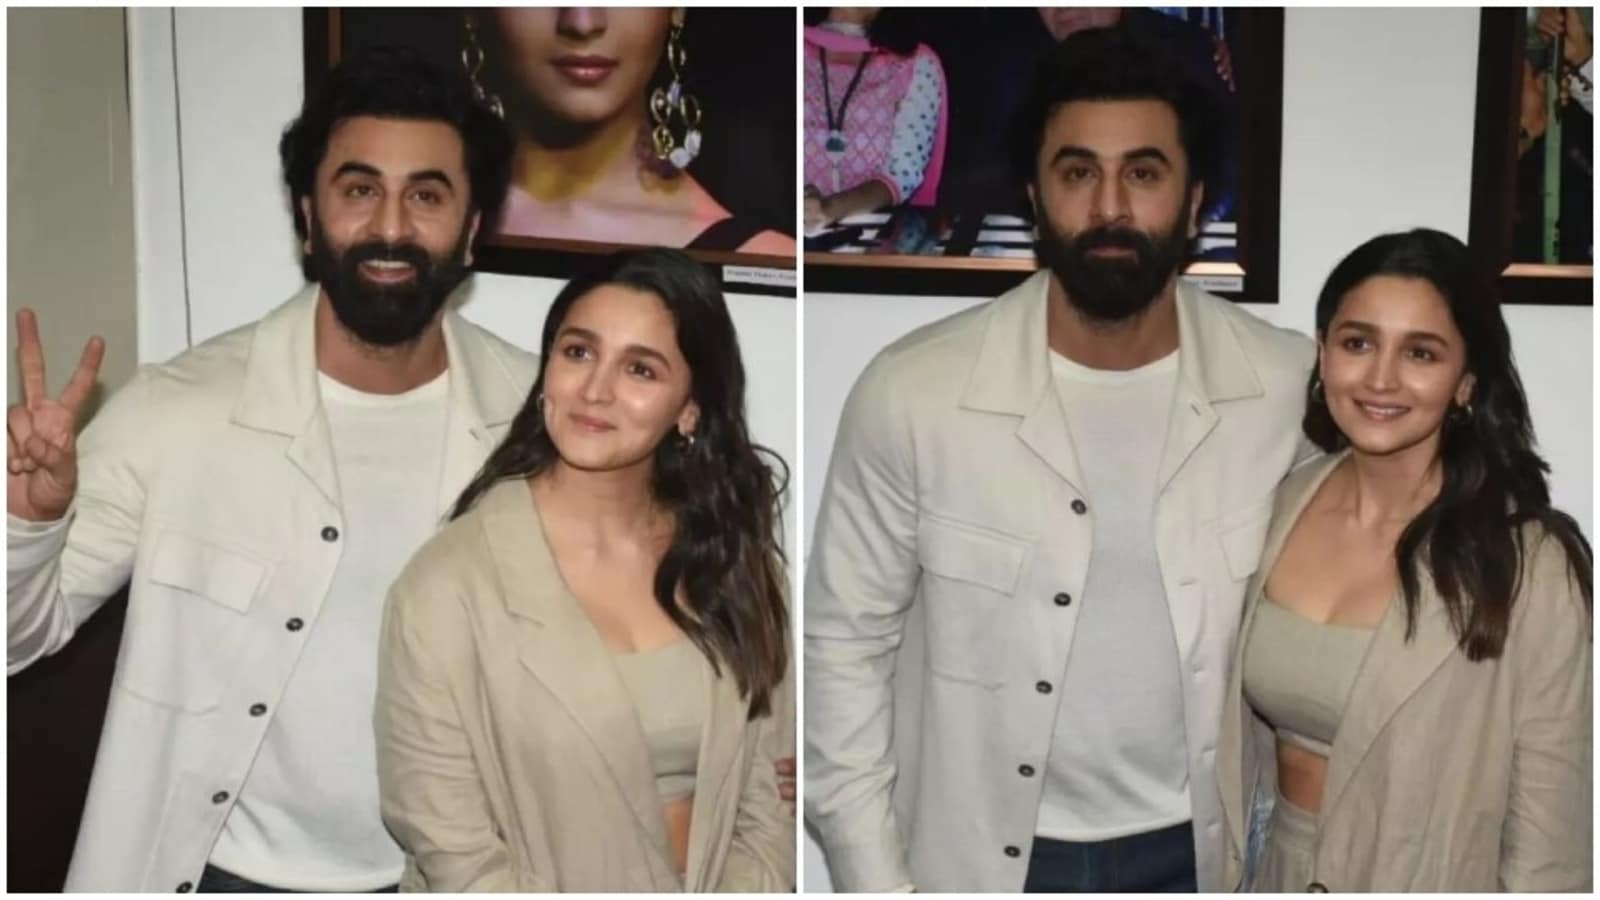 Alia Bhattxxx Com - Alia Bhatt makes effortless styling look easy in chic powersuit with Ranbir  Kapoor at Mumbai event: All pics, videos | Fashion Trends - Hindustan Times